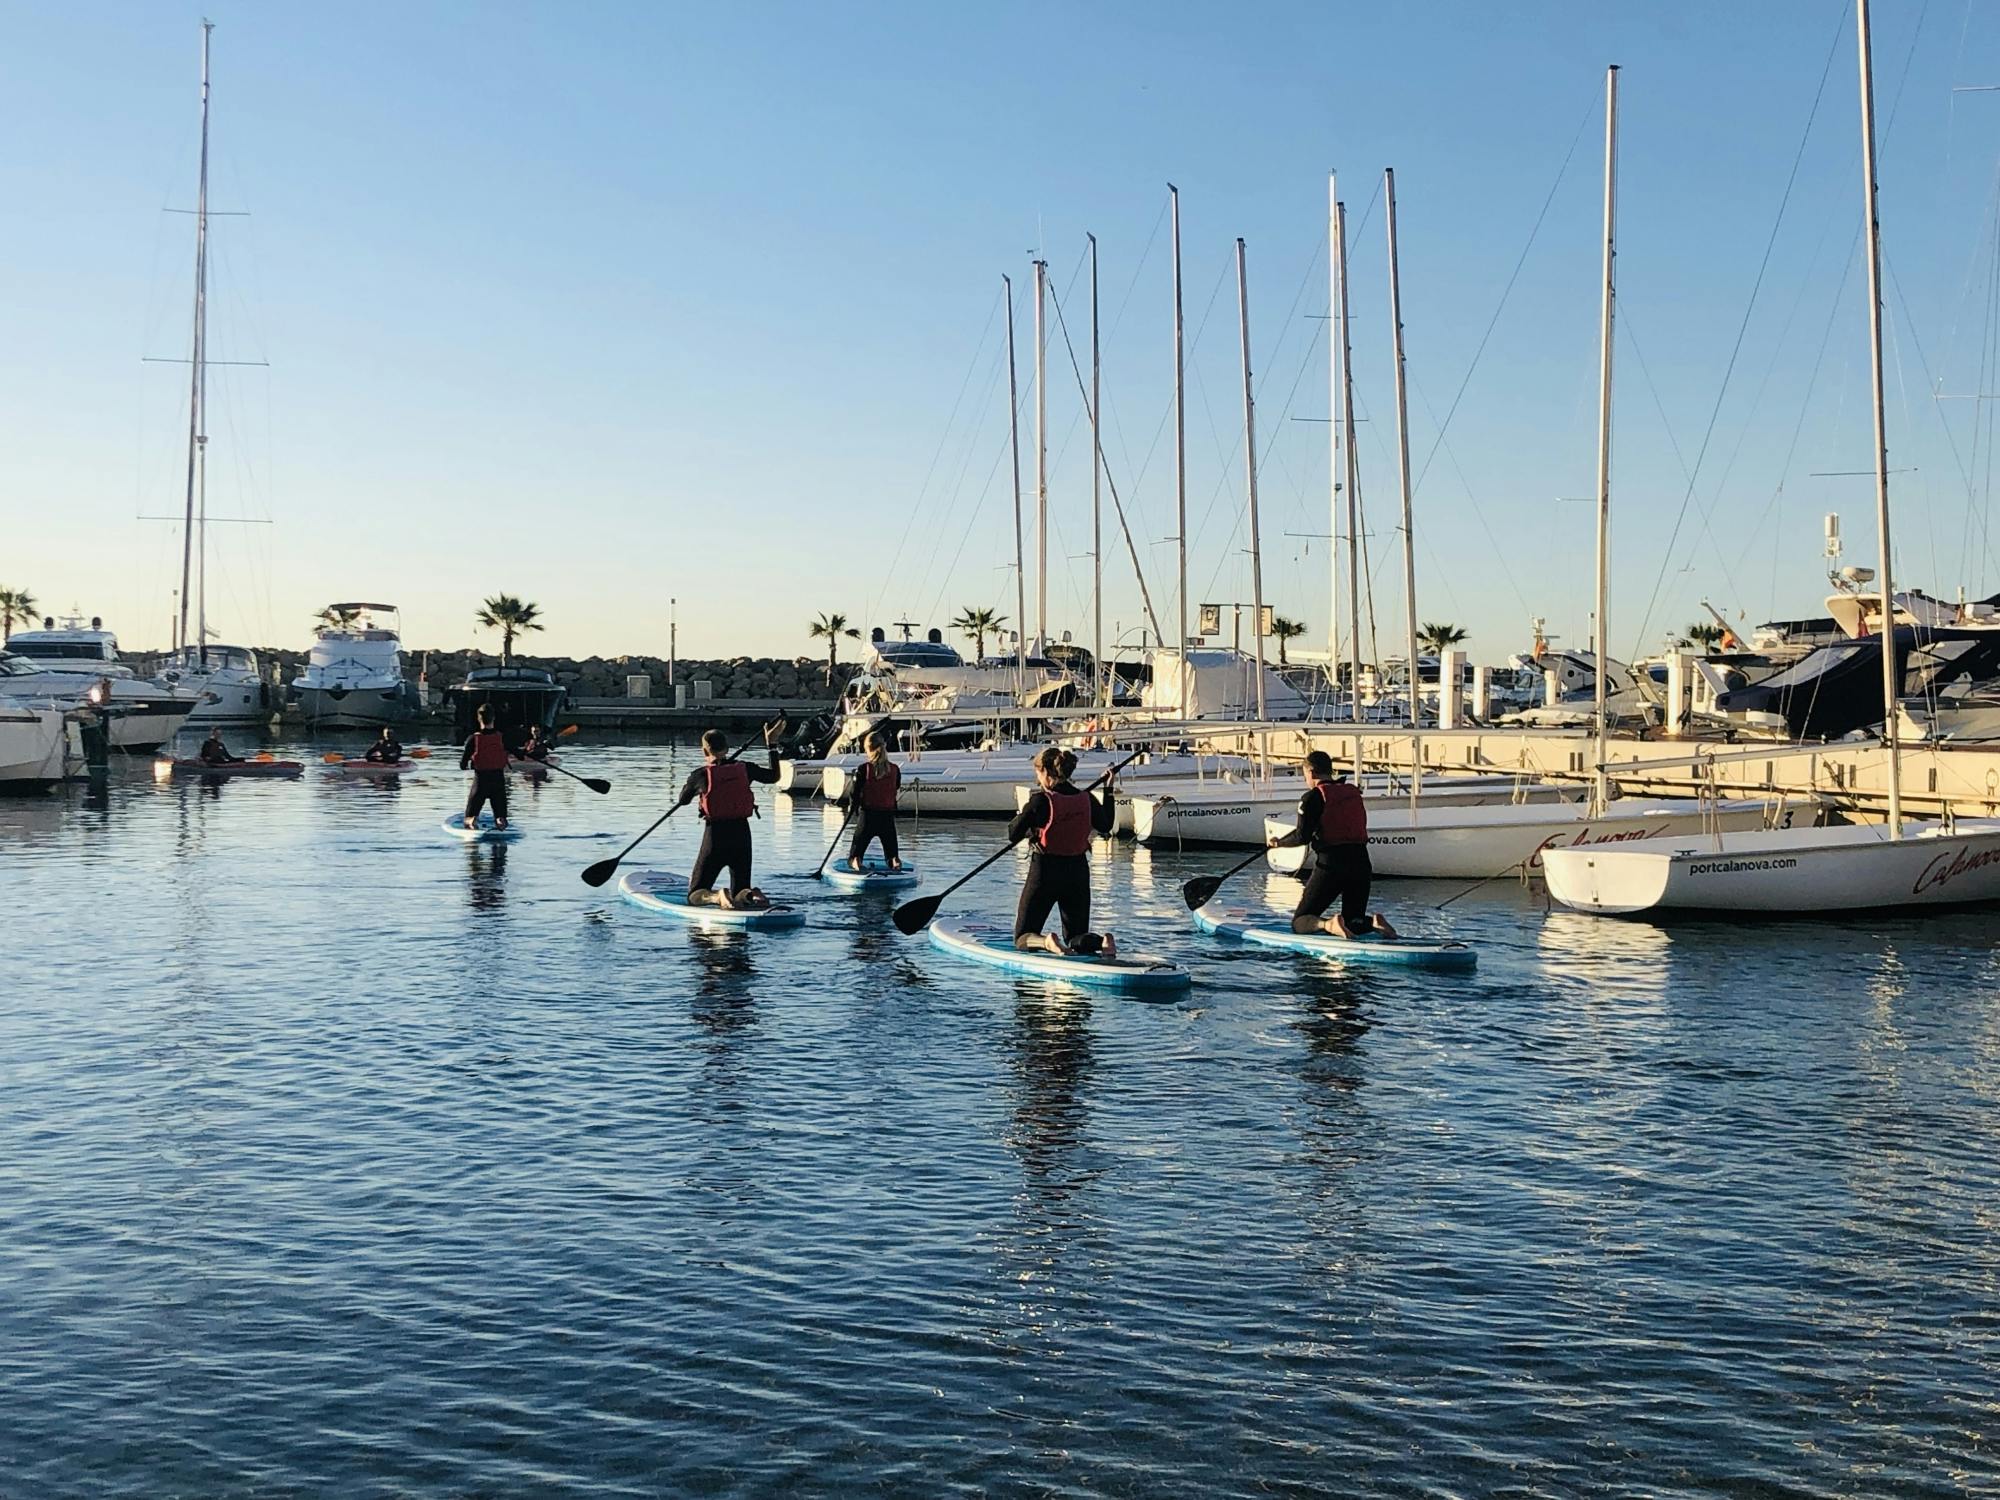 Stand Up Paddle huur in Palma de Mallorca